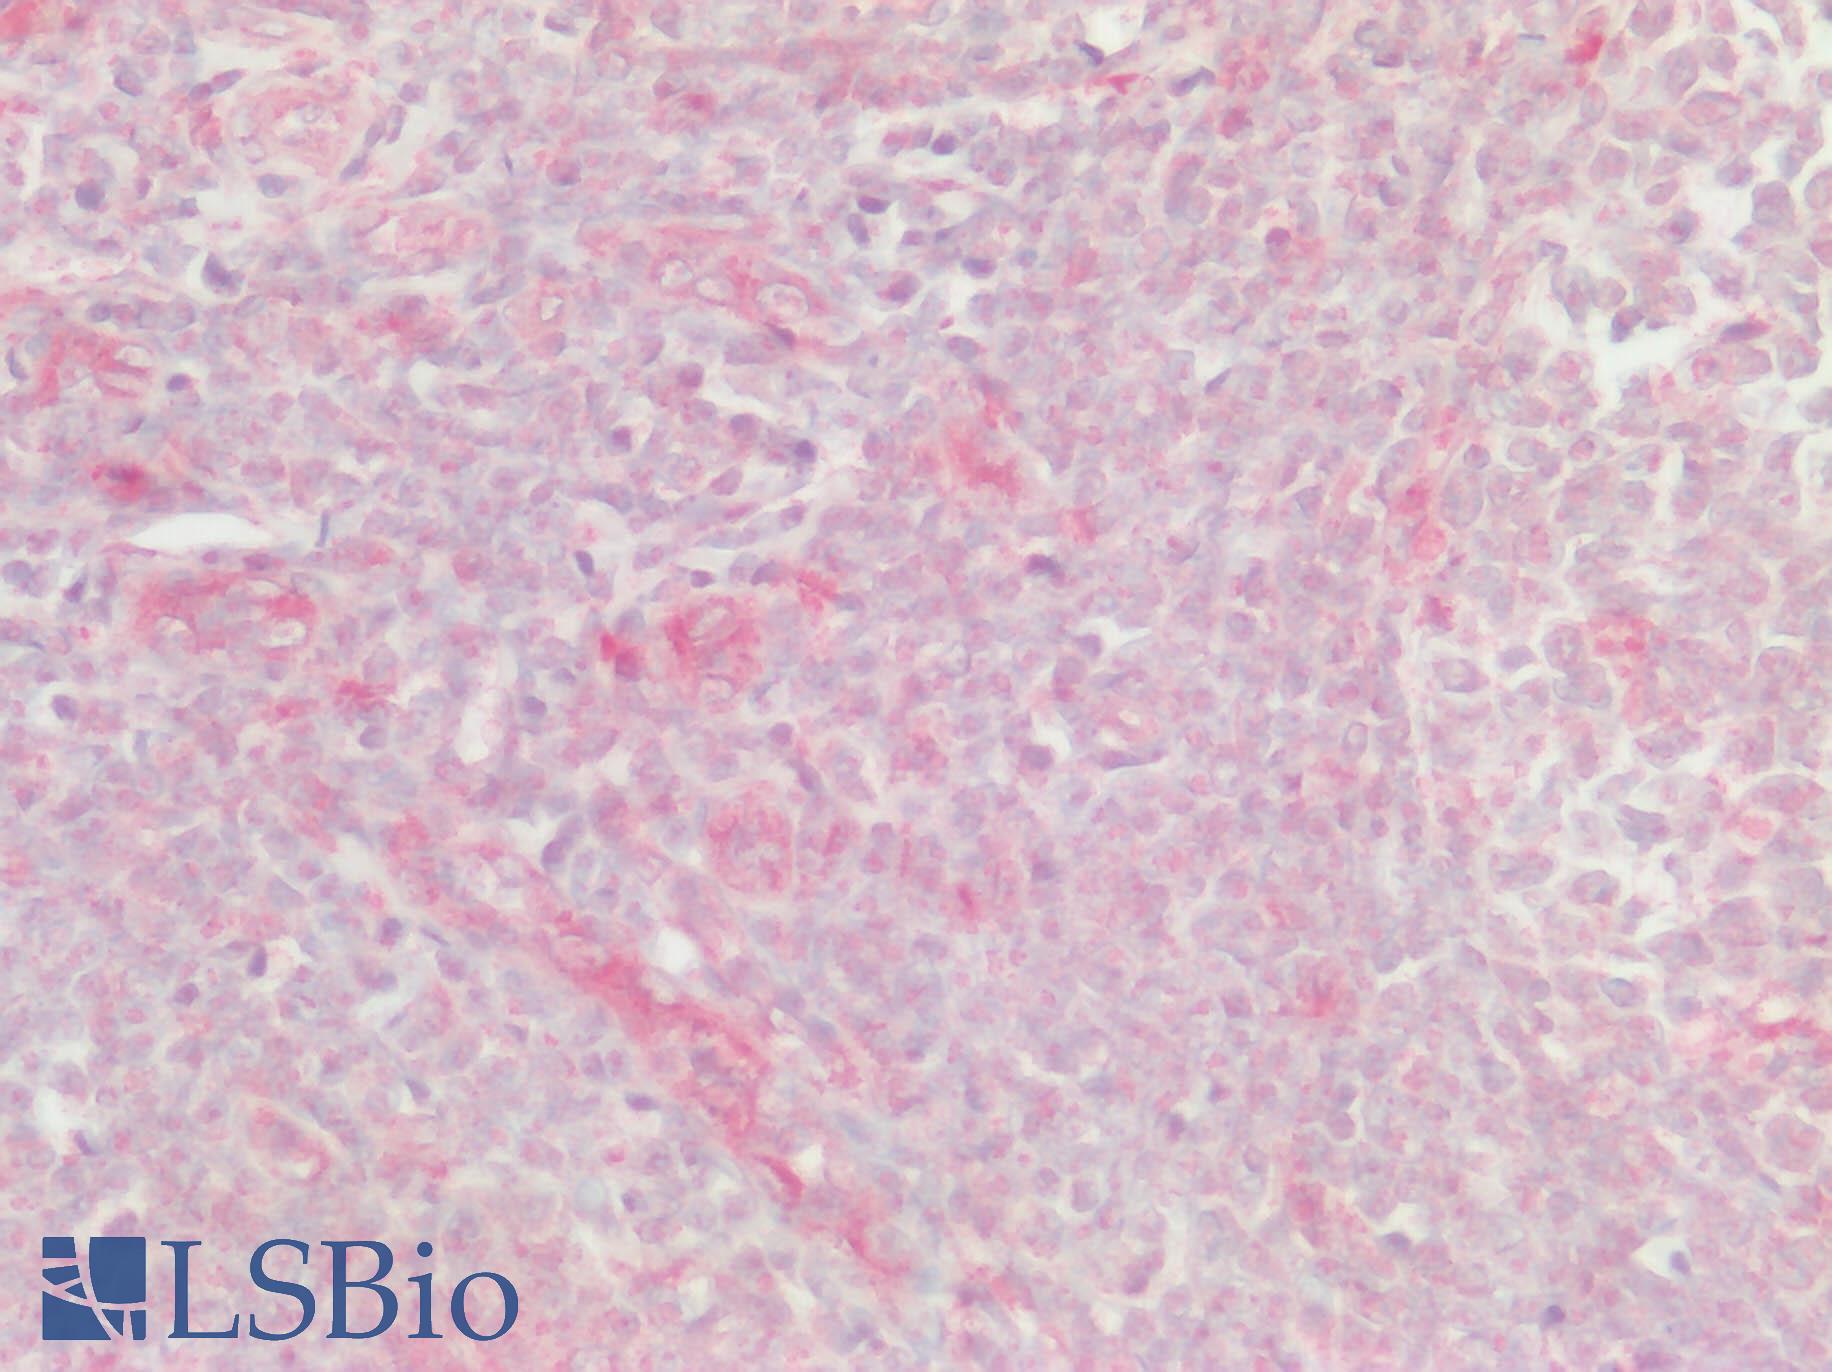 XCR1 Antibody - Human Tonsil: Formalin-Fixed, Paraffin-Embedded (FFPE)